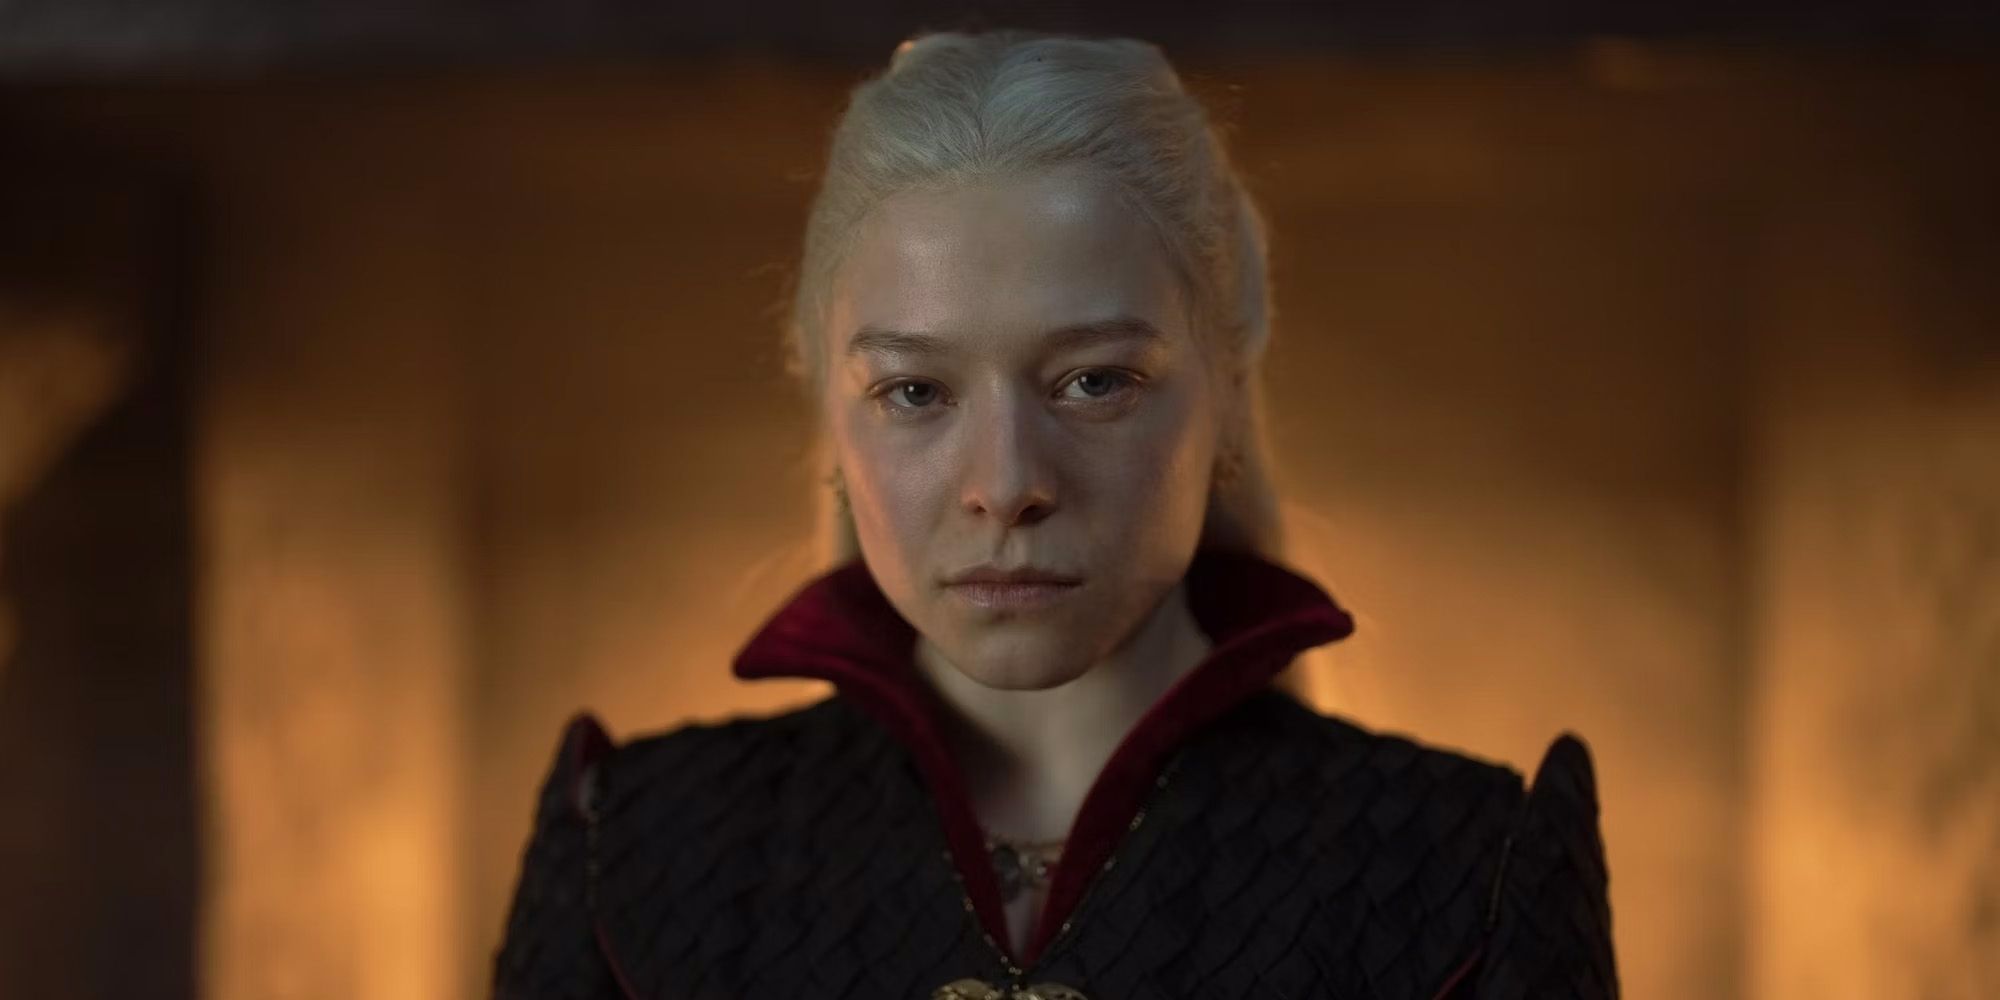 Emma D'Arcy as Rhaenyra Targaryen looking angry in House of the Dragon season 1 finale